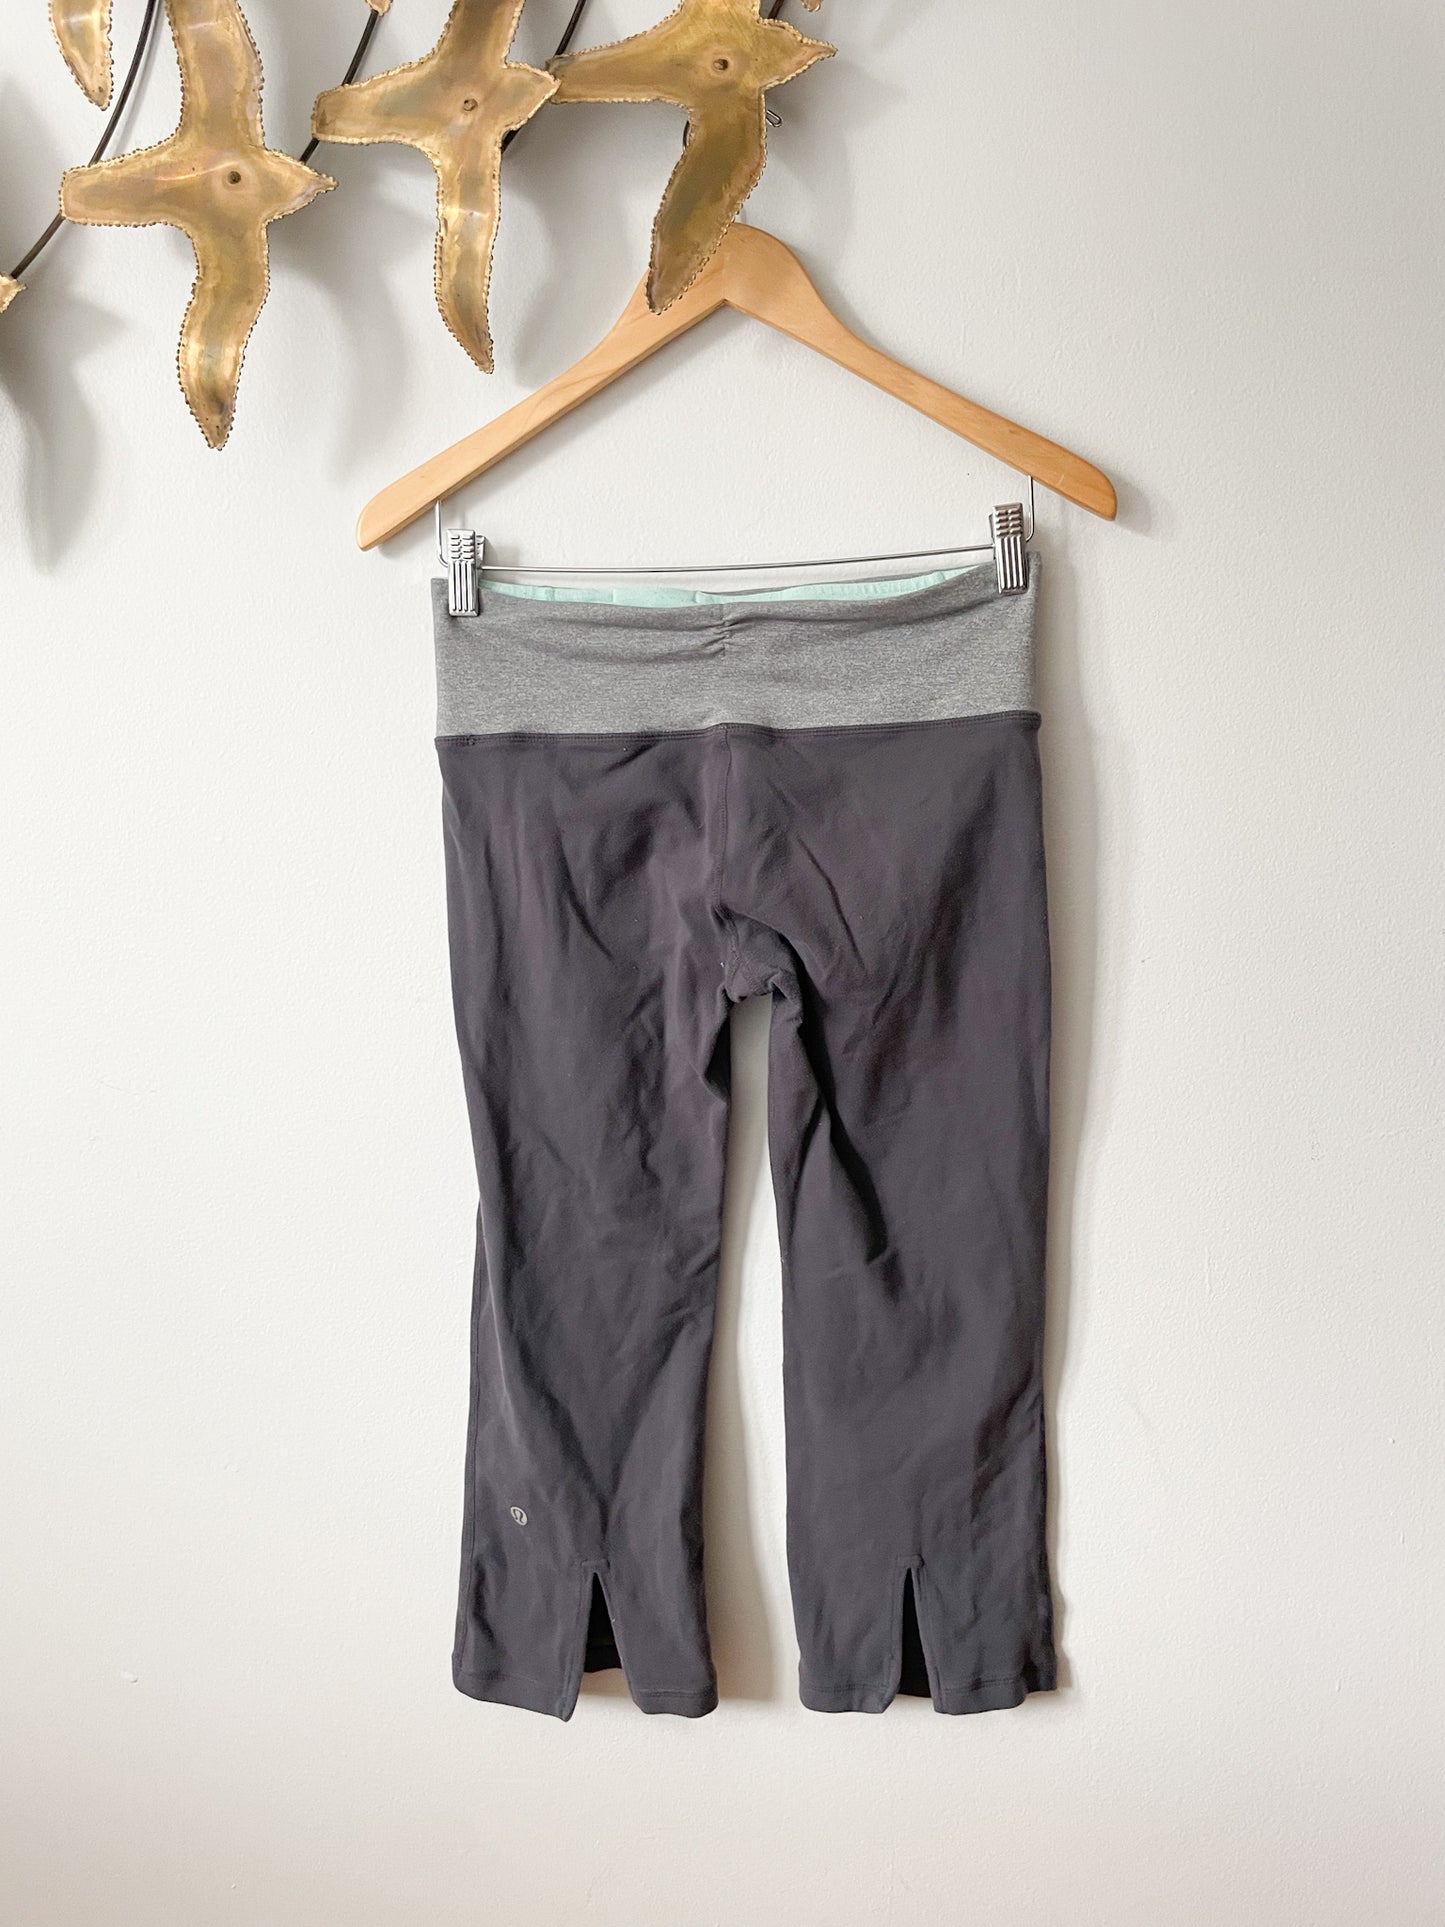 Lululemon On the Fly Pant size 4 Wee Are From Space Nimbus Battleship NWT  Stripe